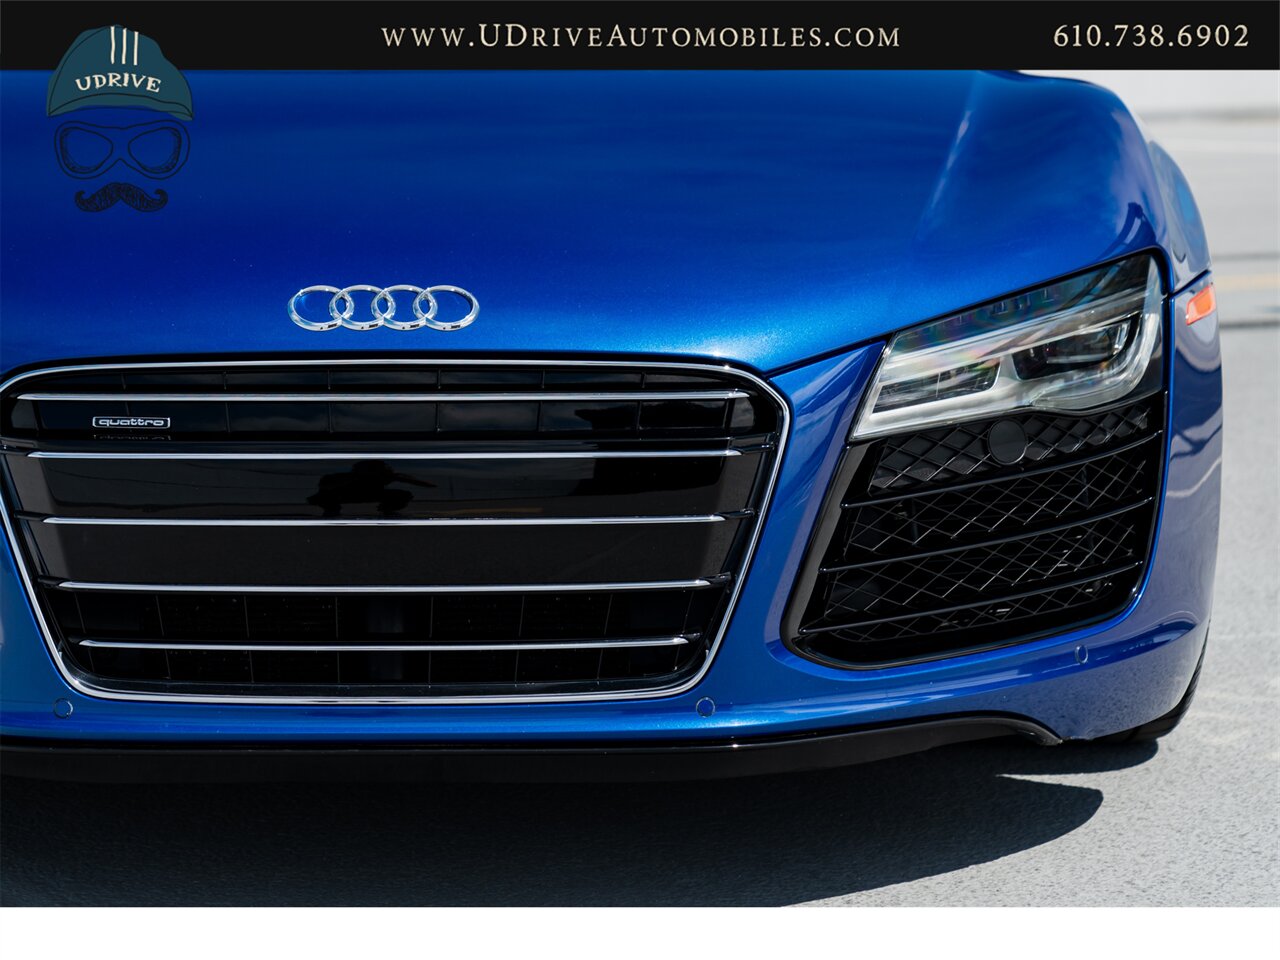 2015 Audi R8 5.2 V10 Quattro 6 Speed Manual 10k Miles  Diamond Stitched Leather 1 of 2 - Photo 11 - West Chester, PA 19382